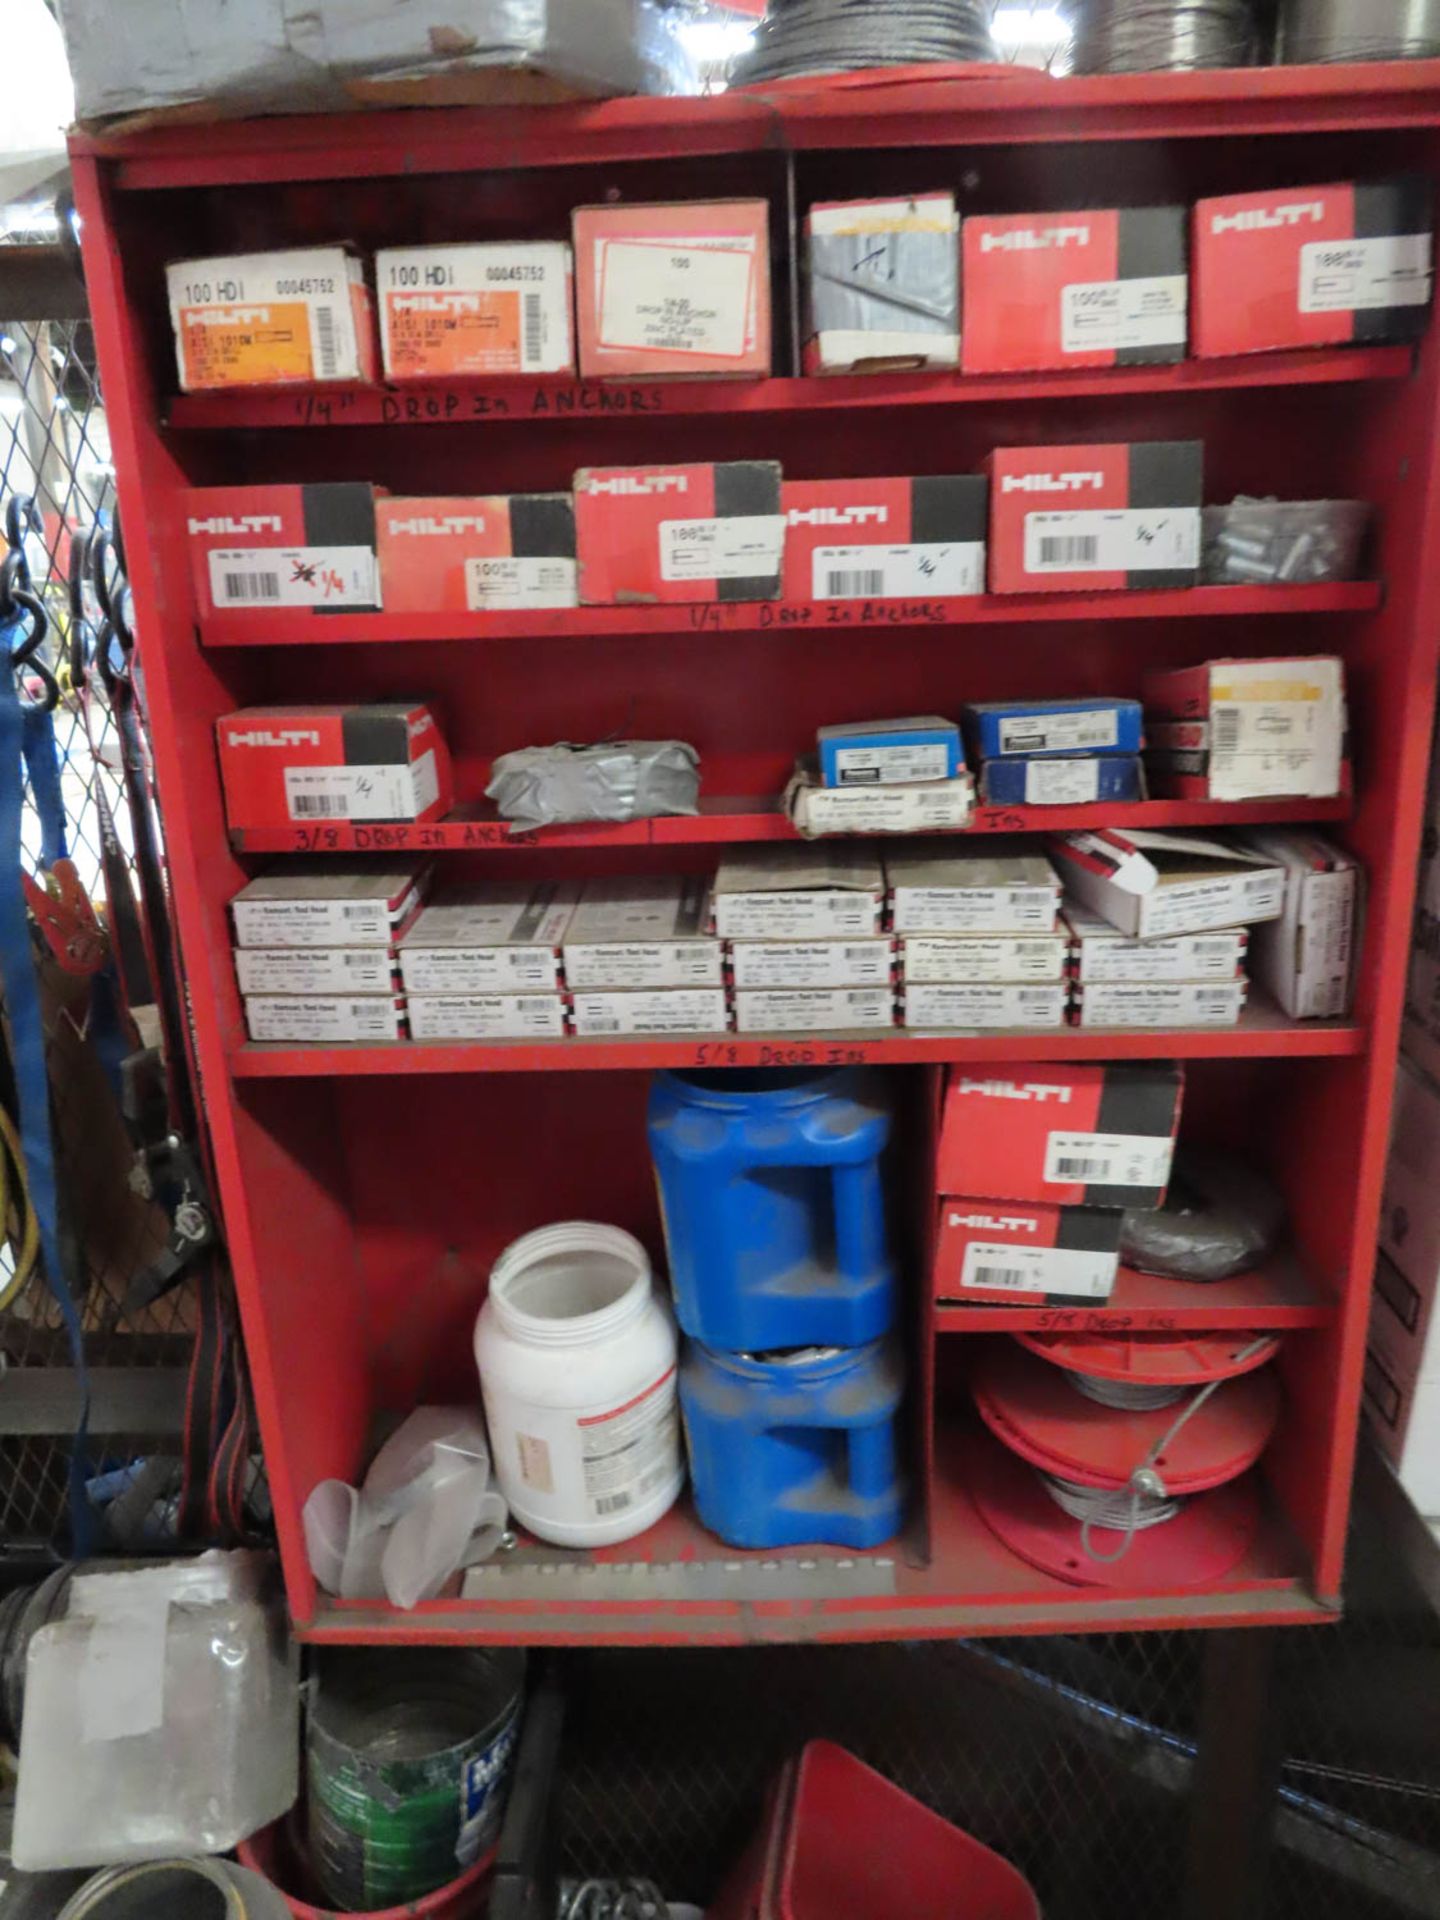 CONTENTS OF STOCK AREA: SCREWS, NUTS, BOLTS, SHELVES, CLAMPS, SEALANTS, ETC. (NO CAGE) - Image 5 of 5